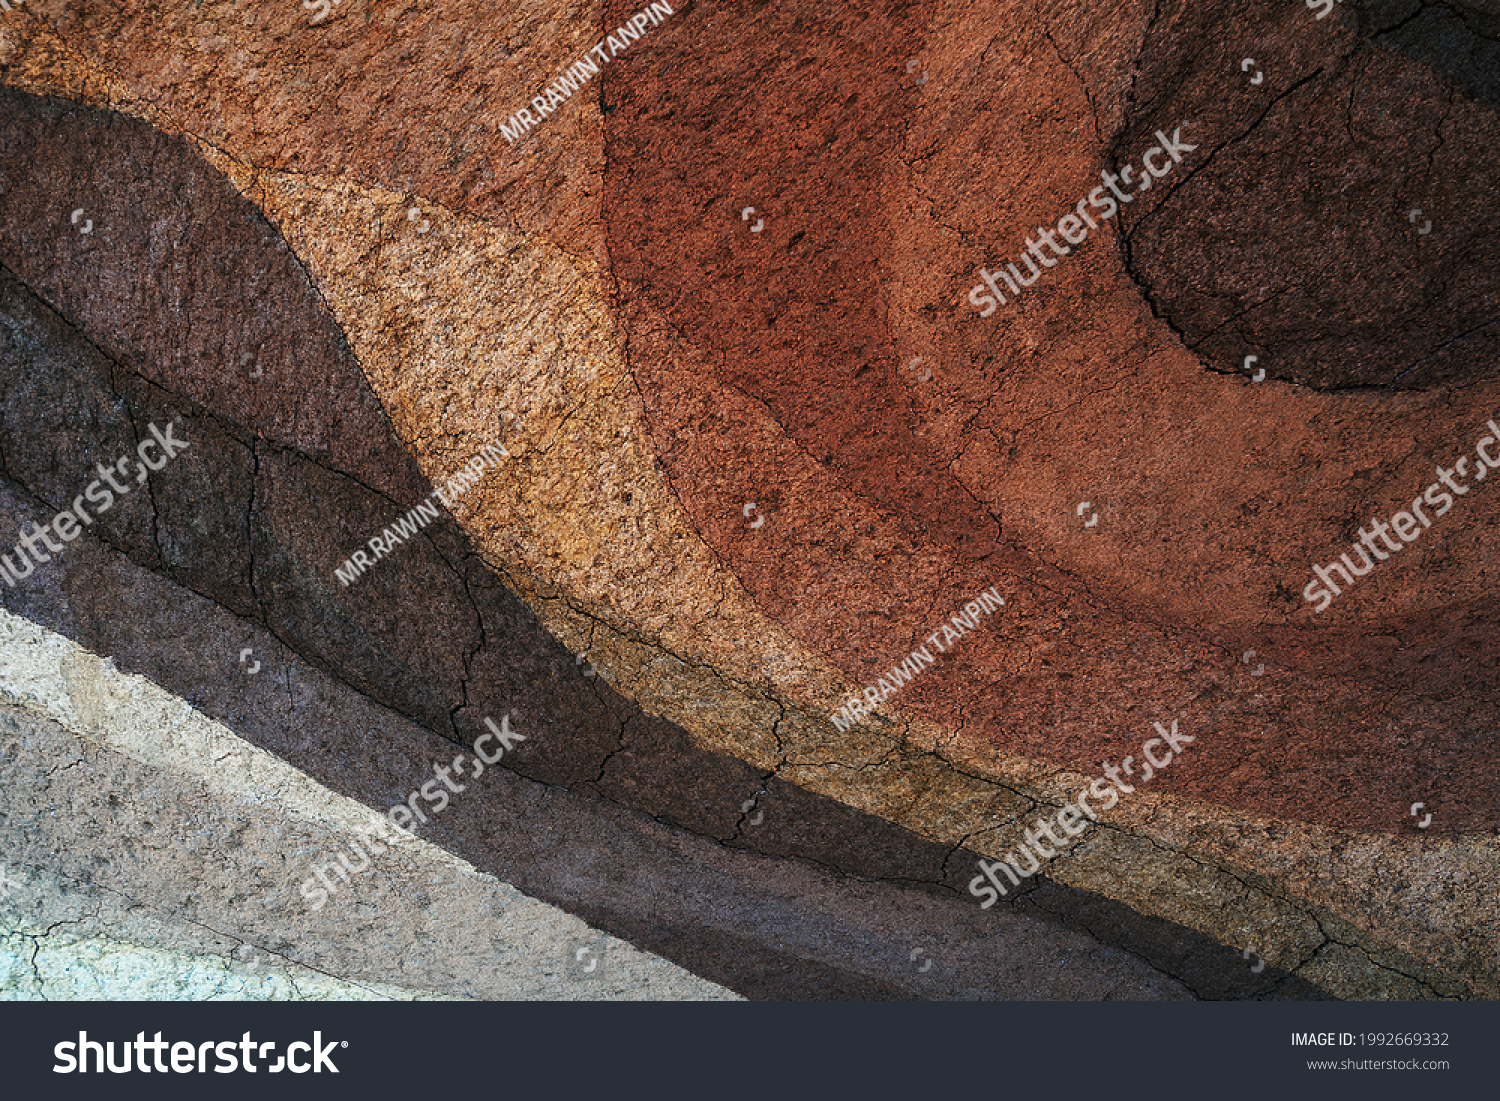 Form of soil layers,its colour and textures,texture layers of earth,Soil background #1992669332